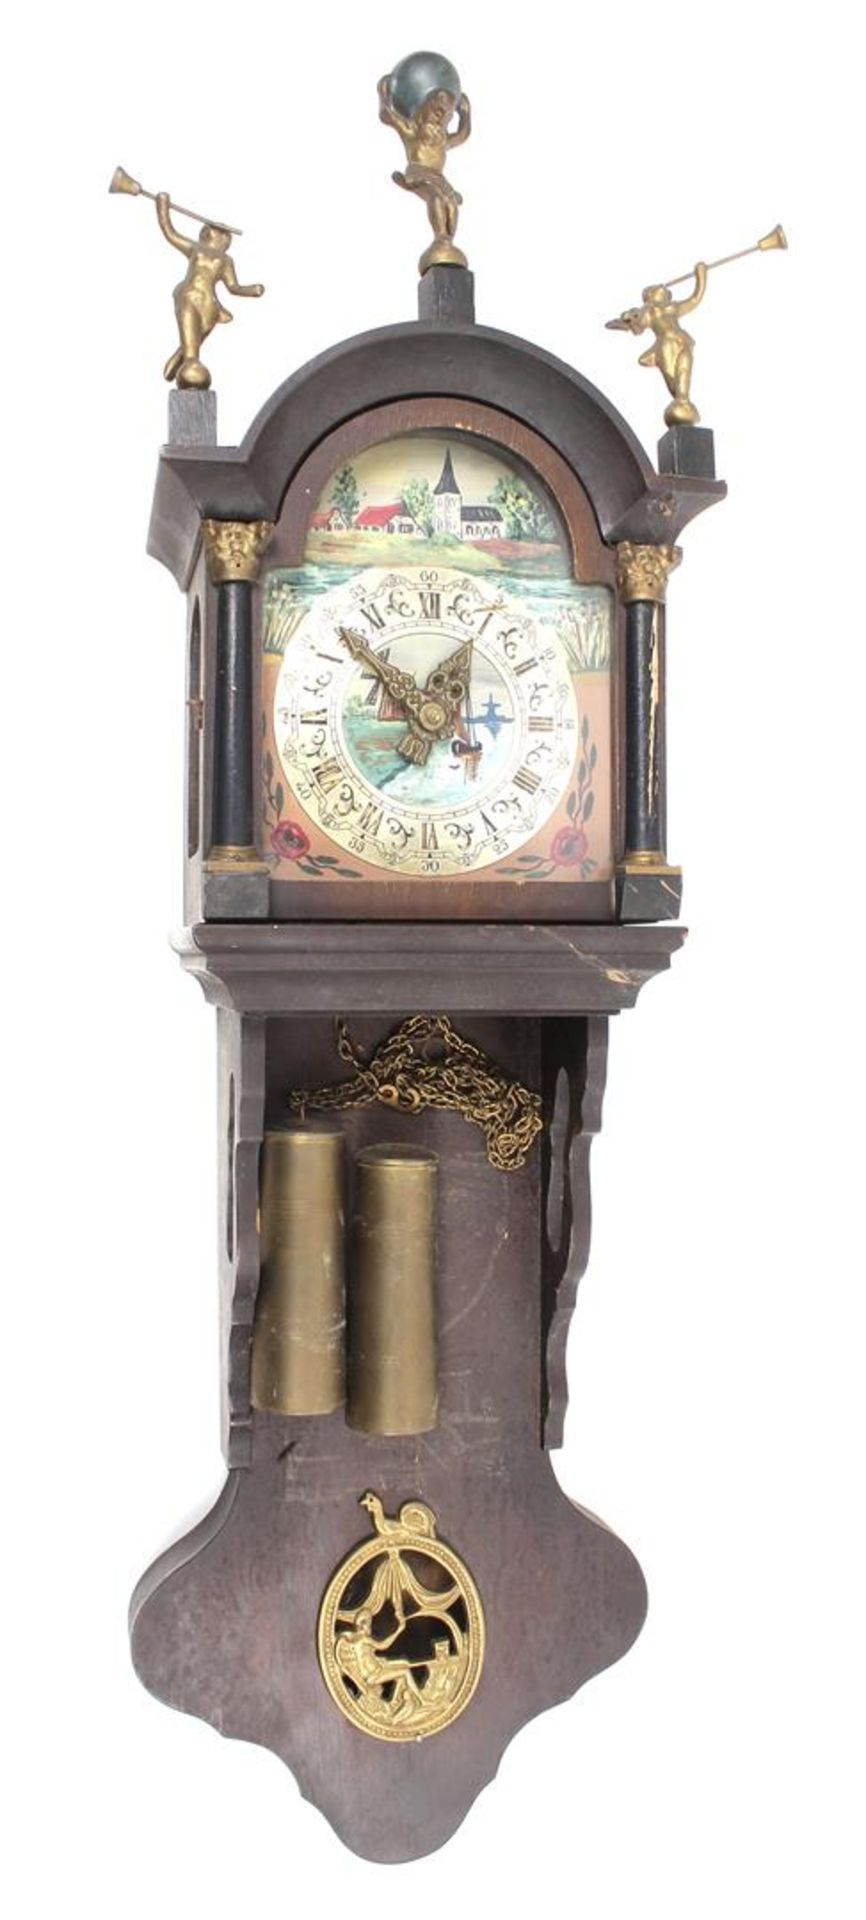 Frisian tail clock with painted dial 84 cm high (fixer-upper)